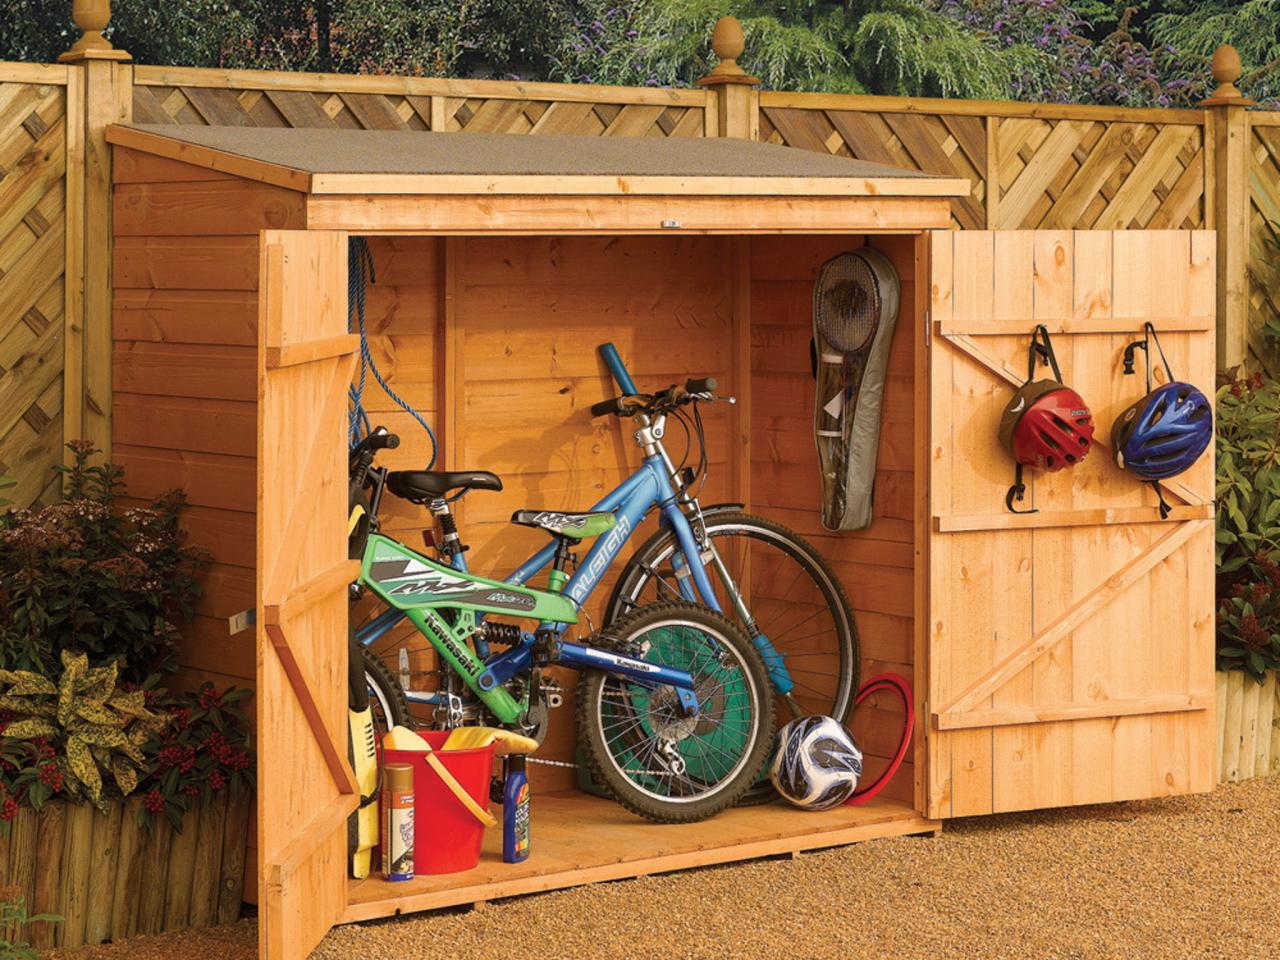 25 Organization and Storage Ideas for the Shed